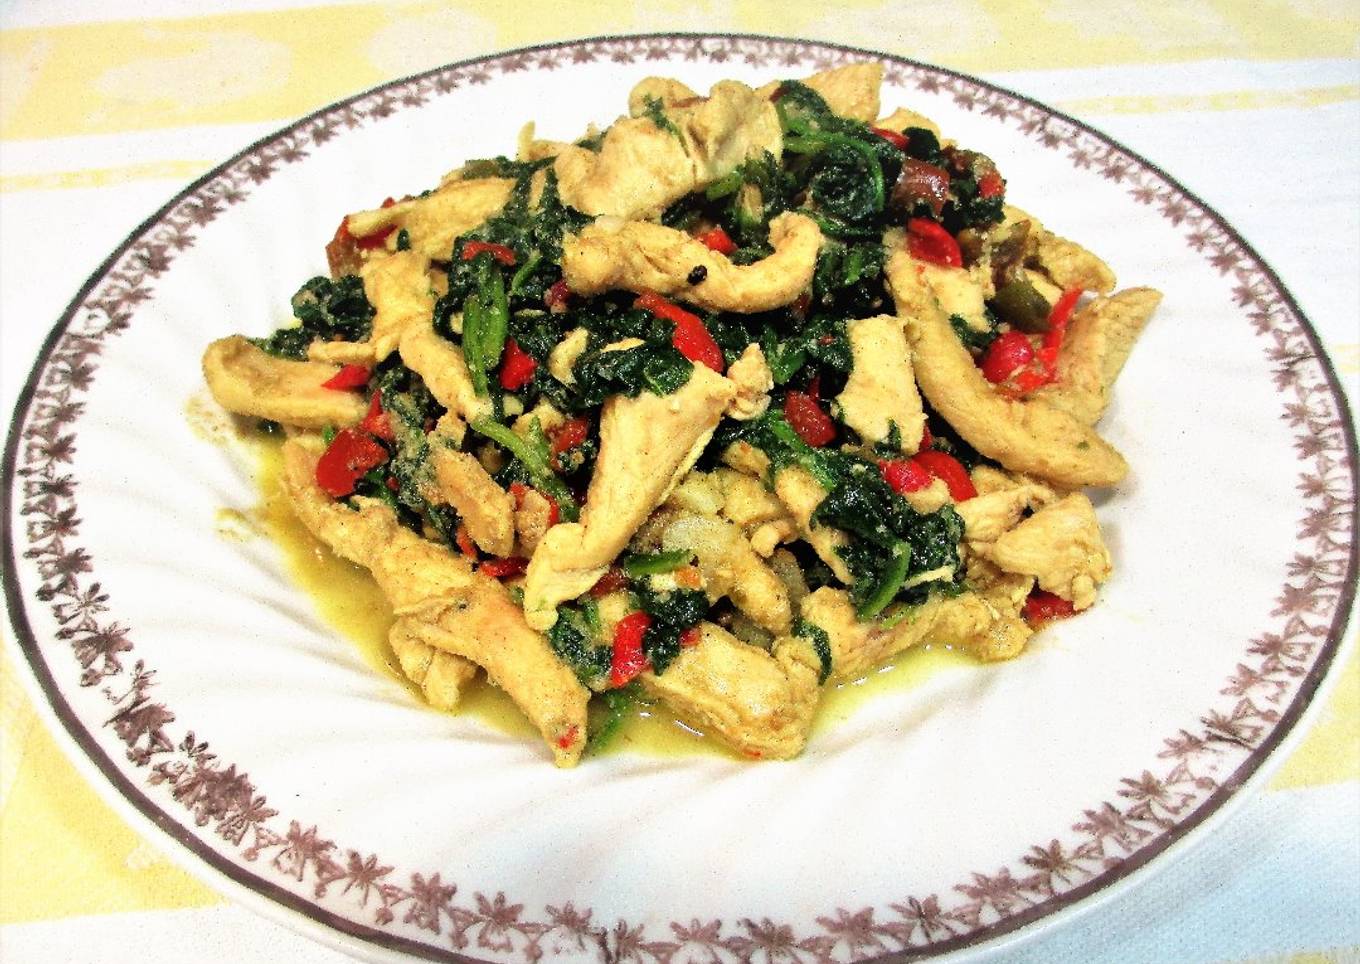 Chicken breast with spinach and cumin - light